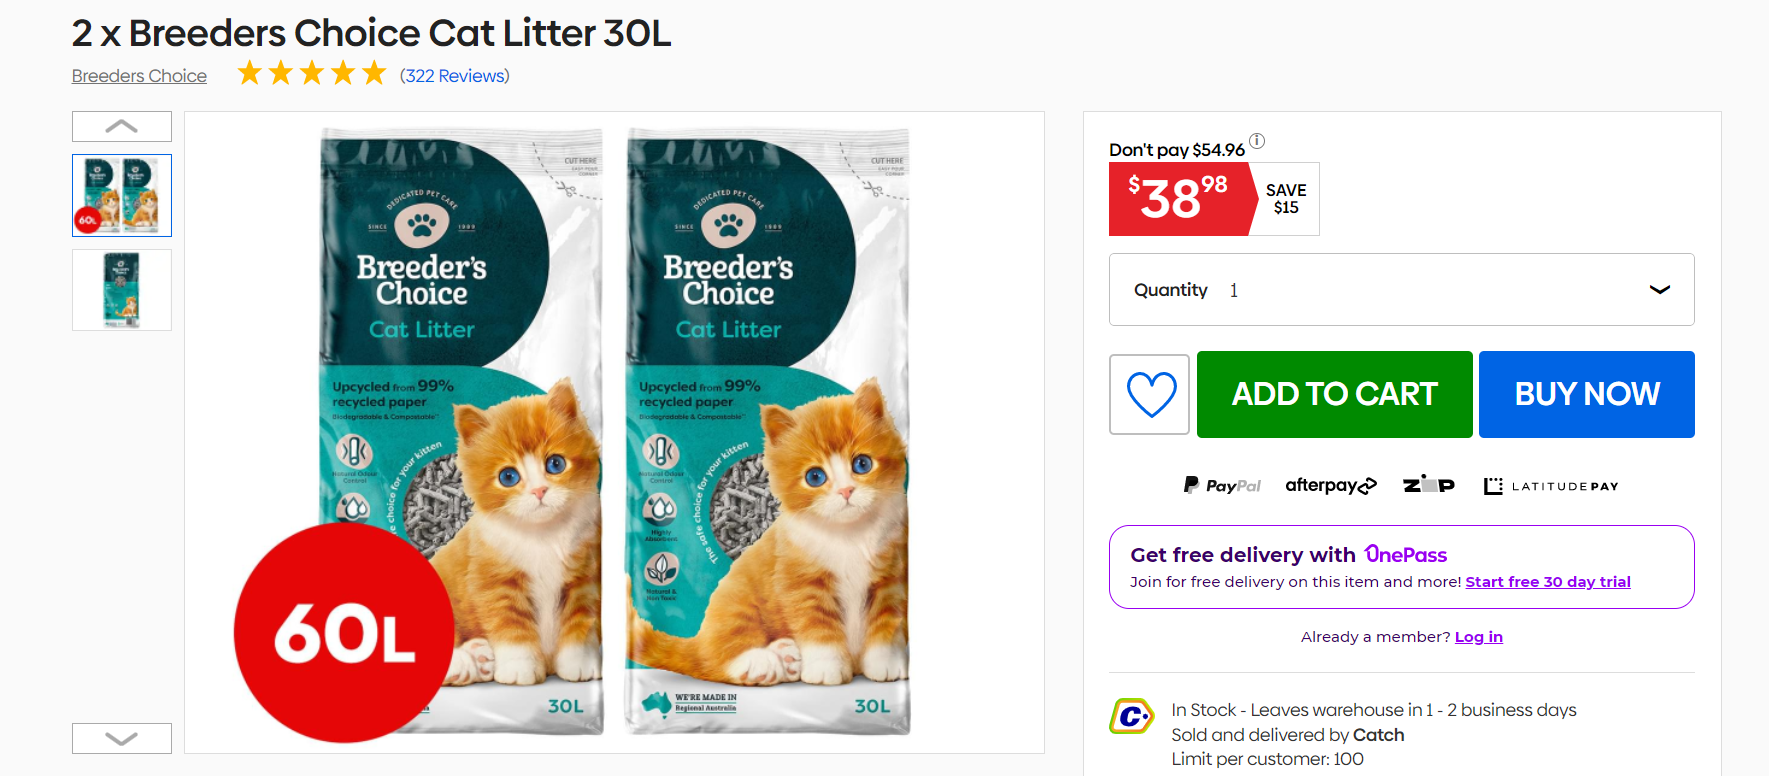 2 x Breeders Choice Cat Litter 30L - best price deal - now $38.98(was $54) + free delivery